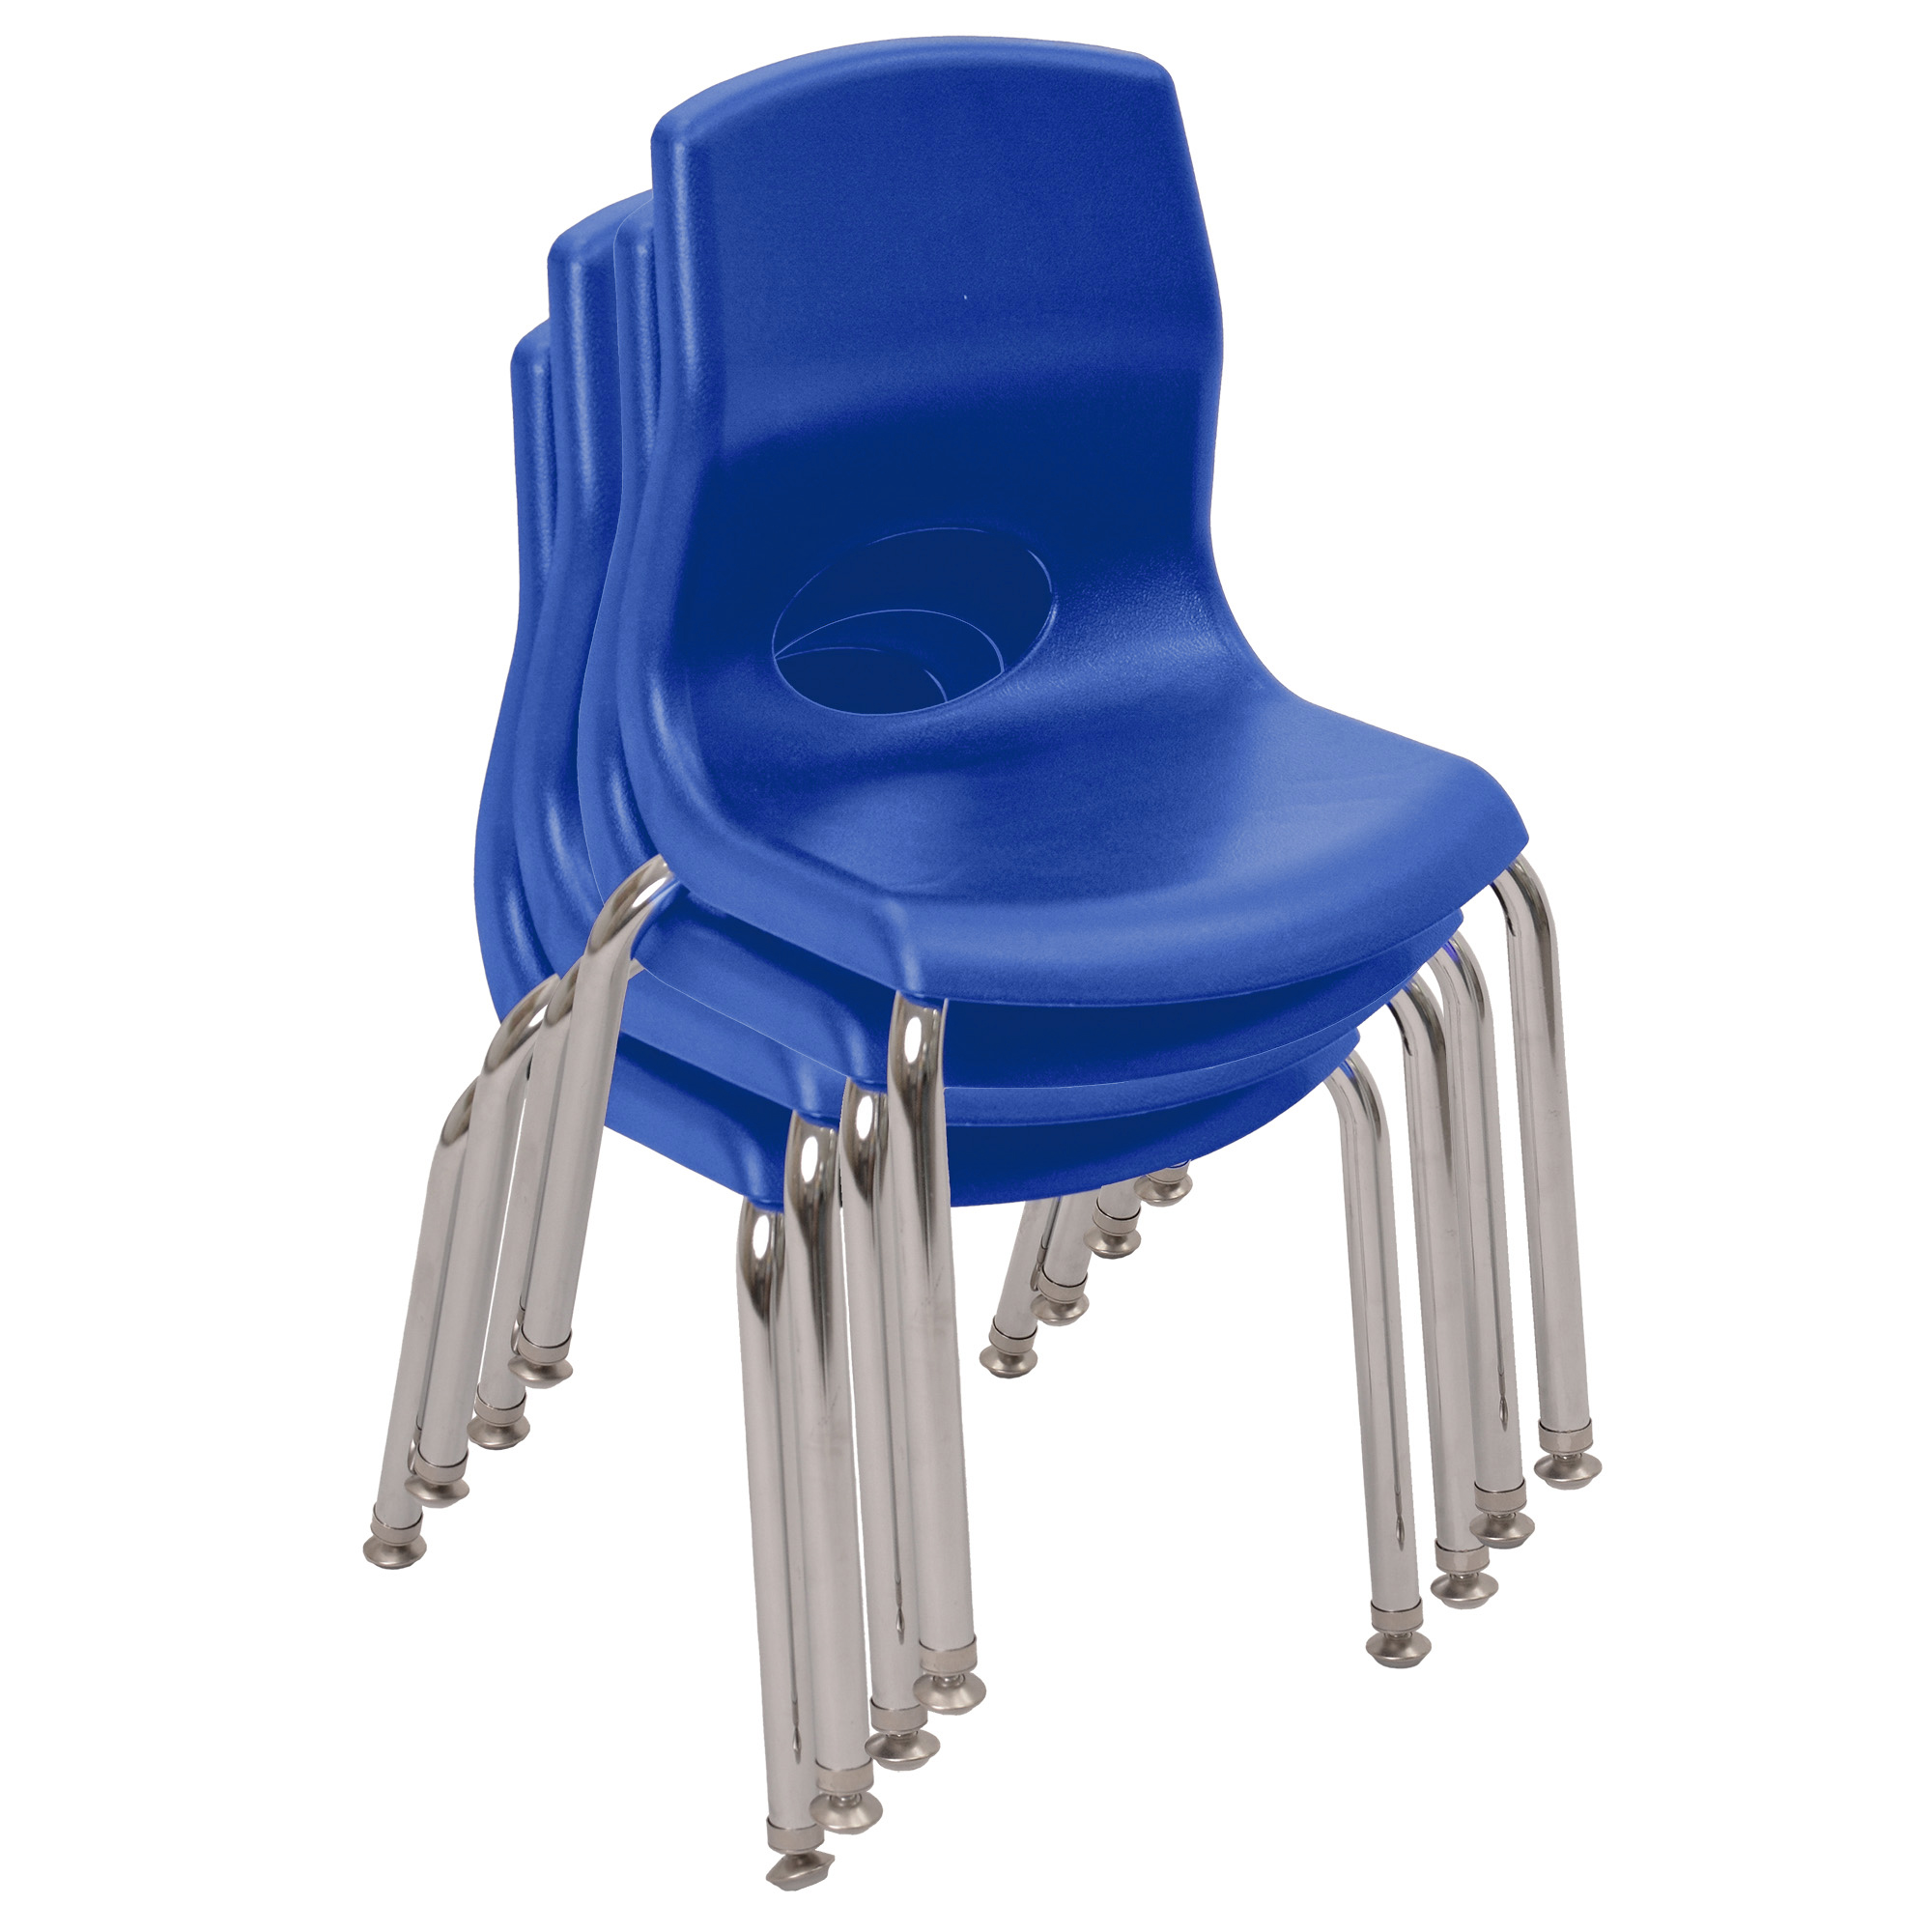 Environments® Comfy Chair with Blue Cushions Social Seating Classroom  Furniture Furniture All Categories